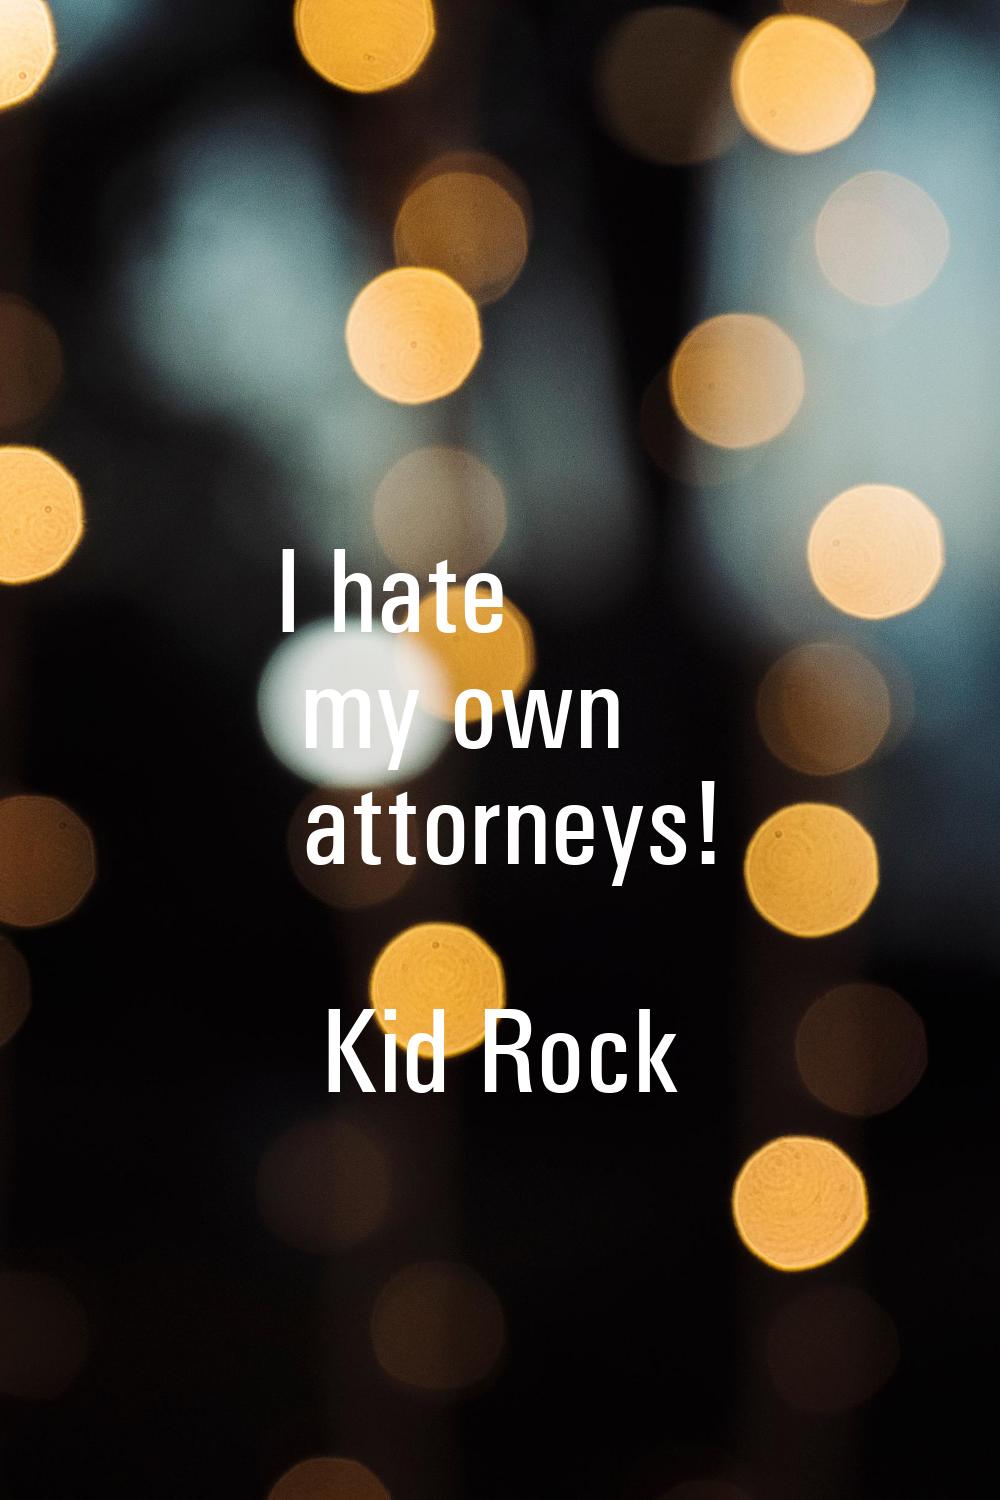 I hate my own attorneys!